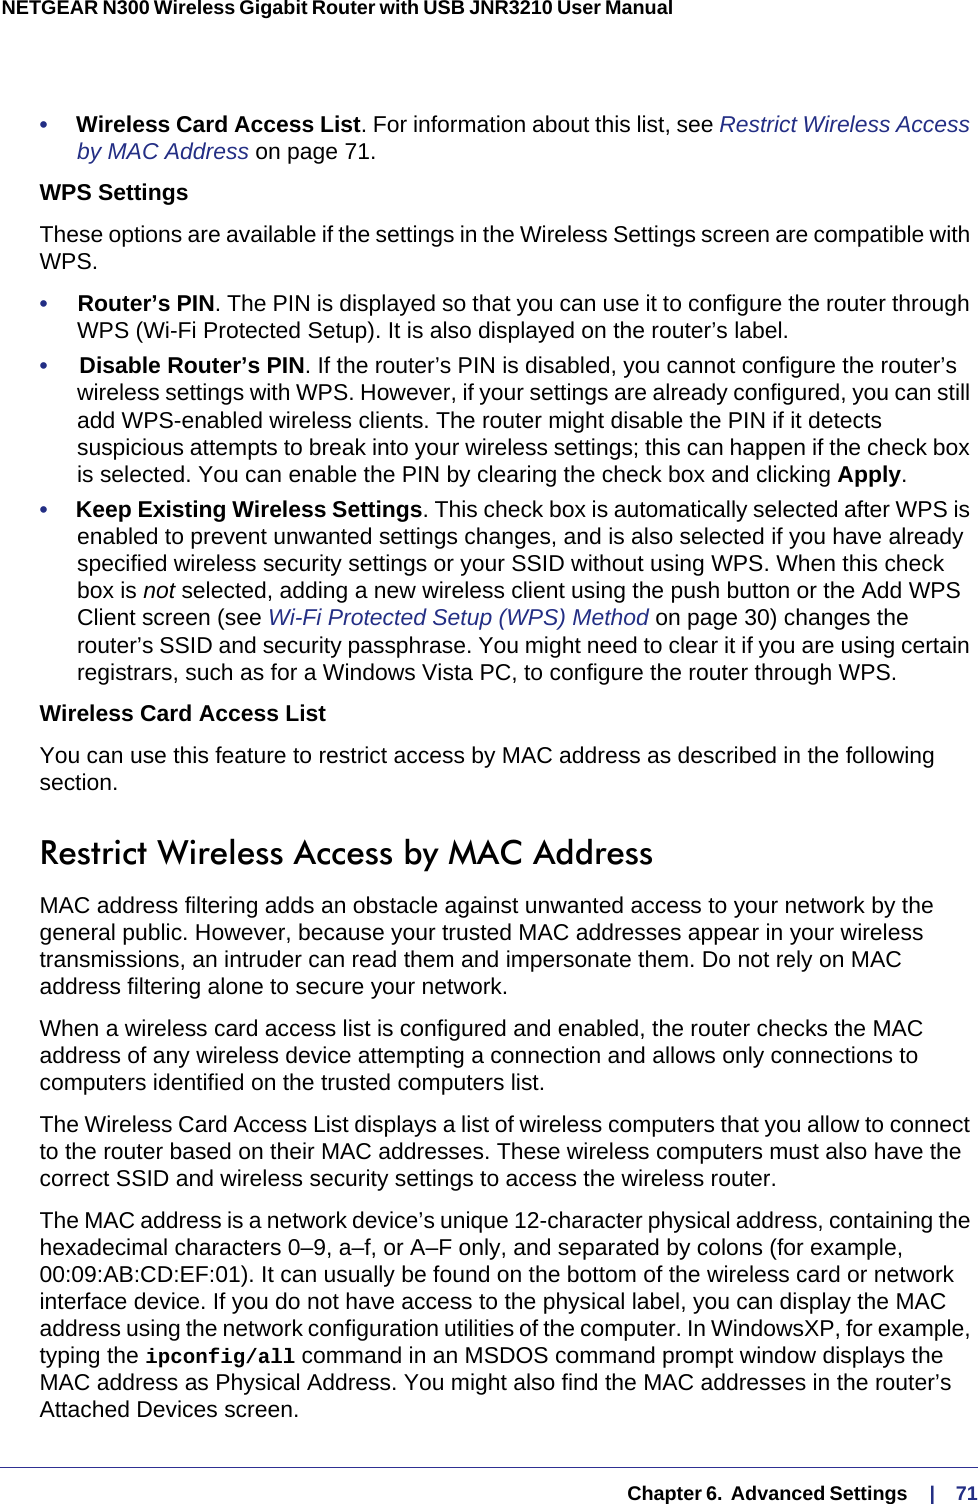   Chapter 6.  Advanced Settings     |    71NETGEAR N300 Wireless Gigabit Router with USB JNR3210 User Manual •     Wireless Card Access List. For information about this list, see Restrict Wireless Access by MAC Address on page  71.WPS SettingsThese options are available if the settings in the Wireless Settings screen are compatible with WPS. •     Router’s PIN. The PIN is displayed so that you can use it to configure the router through WPS (Wi-Fi Protected Setup). It is also displayed on the router’s label.•     Disable Router’s PIN. If the router’s PIN is disabled, you cannot configure the router’s wireless settings with WPS. However, if your settings are already configured, you can still add WPS-enabled wireless clients. The router might disable the PIN if it detects suspicious attempts to break into your wireless settings; this can happen if the check box is selected. You can enable the PIN by clearing the check box and clicking Apply. •     Keep Existing Wireless Settings. This check box is automatically selected after WPS is enabled to prevent unwanted settings changes, and is also selected if you have already specified wireless security settings or your SSID without using WPS. When this check box is not selected, adding a new wireless client using the push button or the Add WPS Client screen (see Wi-Fi Protected Setup (WPS) Method on page  30) changes the router’s SSID and security passphrase. You might need to clear it if you are using certain registrars, such as for a Windows Vista PC, to configure the router through WPS.Wireless Card Access ListYou can use this feature to restrict access by MAC address as described in the following section.Restrict Wireless Access by MAC AddressMAC address filtering adds an obstacle against unwanted access to your network by the general public. However, because your trusted MAC addresses appear in your wireless transmissions, an intruder can read them and impersonate them. Do not rely on MAC address filtering alone to secure your network.When a wireless card access list is configured and enabled, the router checks the MAC address of any wireless device attempting a connection and allows only connections to computers identified on the trusted computers list. The Wireless Card Access List displays a list of wireless computers that you allow to connect to the router based on their MAC addresses. These wireless computers must also have the correct SSID and wireless security settings to access the wireless router.The MAC address is a network device’s unique 12-character physical address, containing the hexadecimal characters 0–9, a–f, or A–F only, and separated by colons (for example, 00:09:AB:CD:EF:01). It can usually be found on the bottom of the wireless card or network interface device. If you do not have access to the physical label, you can display the MAC address using the network configuration utilities of the computer. In WindowsXP, for example, typing the ipconfig/all command in an MSDOS command prompt window displays the MAC address as Physical Address. You might also find the MAC addresses in the router’s Attached Devices screen.